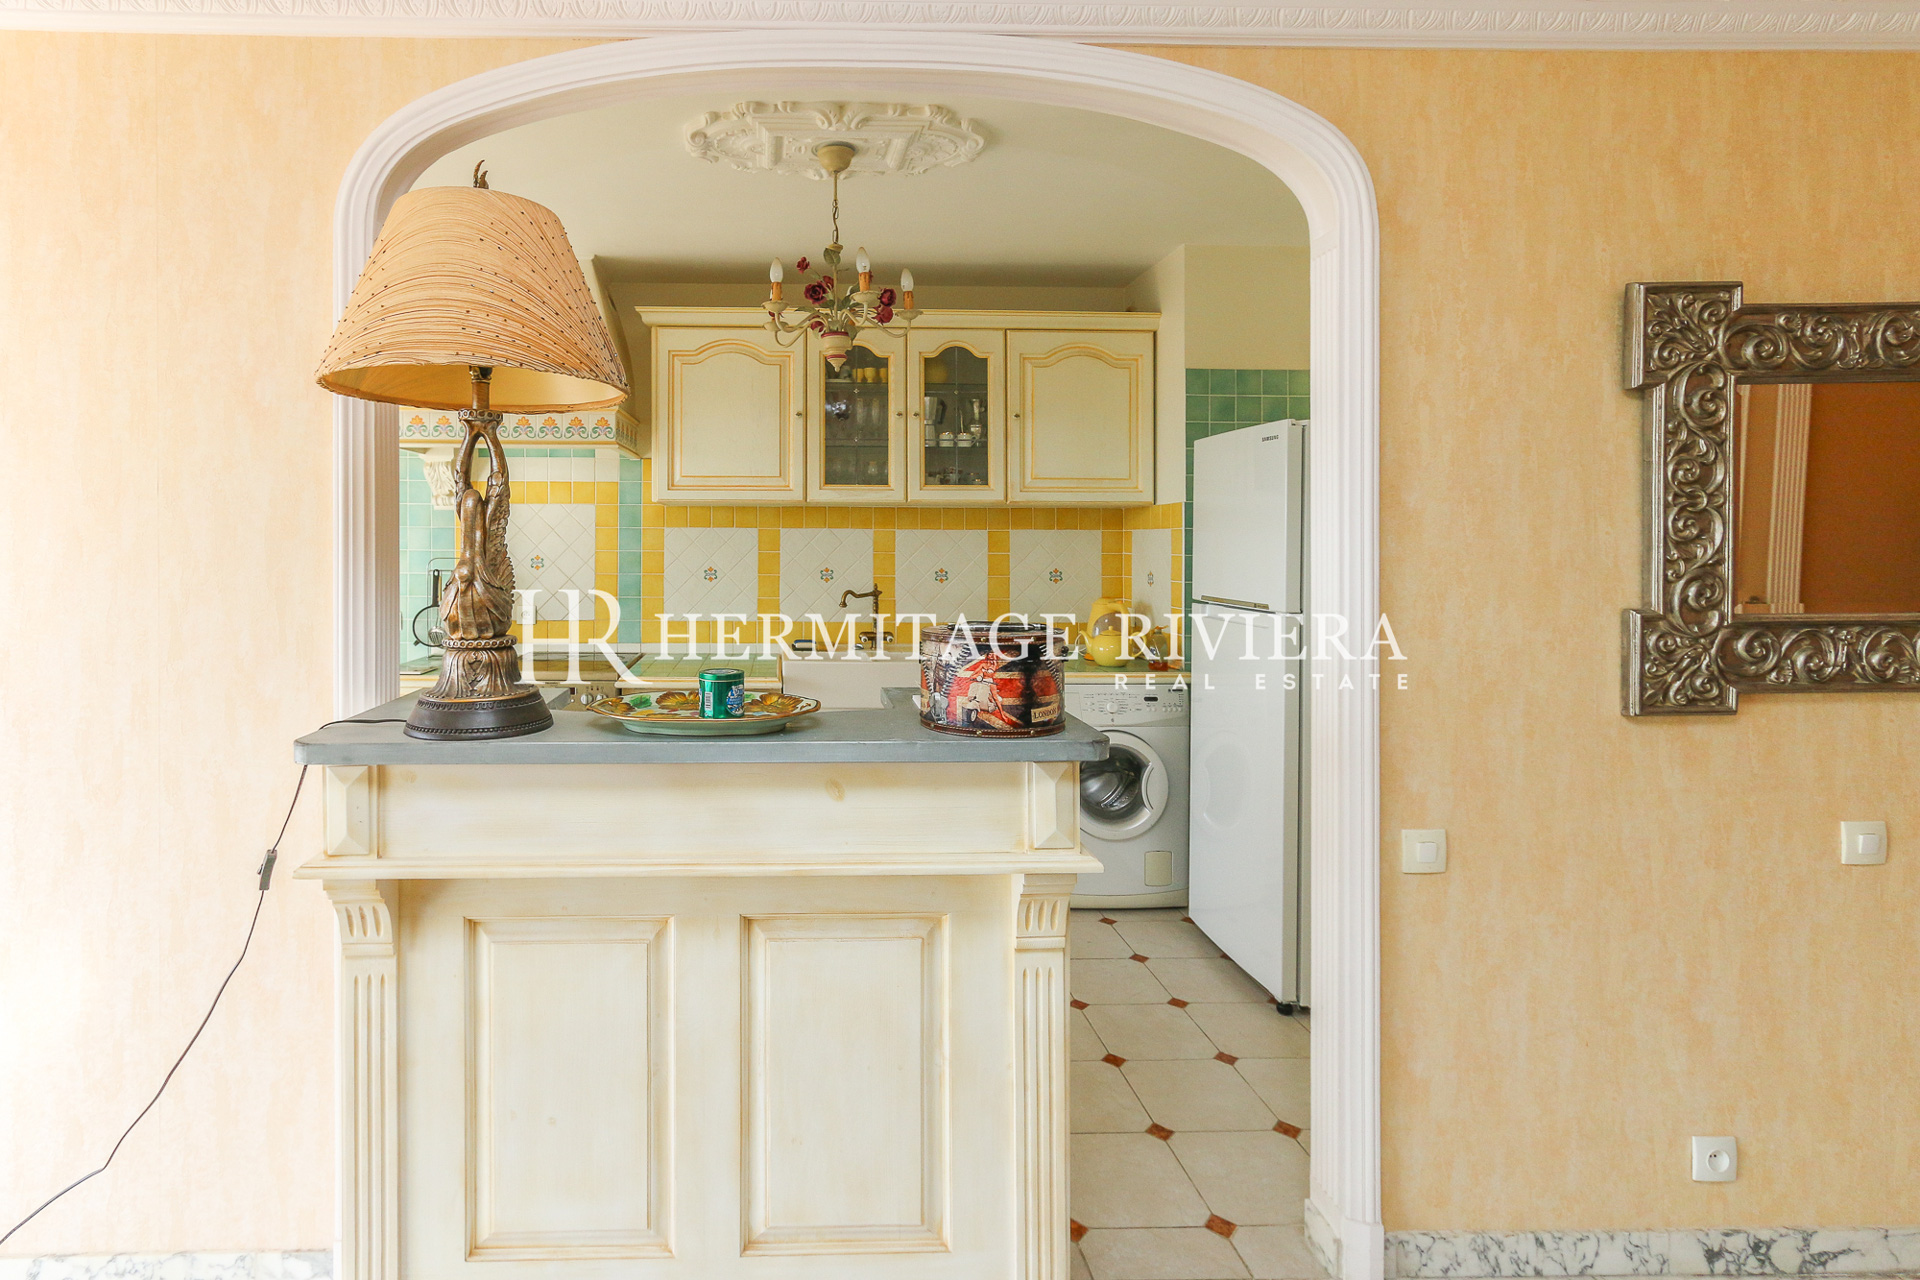 Top floor two bedroom apartment with views over Nice and the sea (image 7)